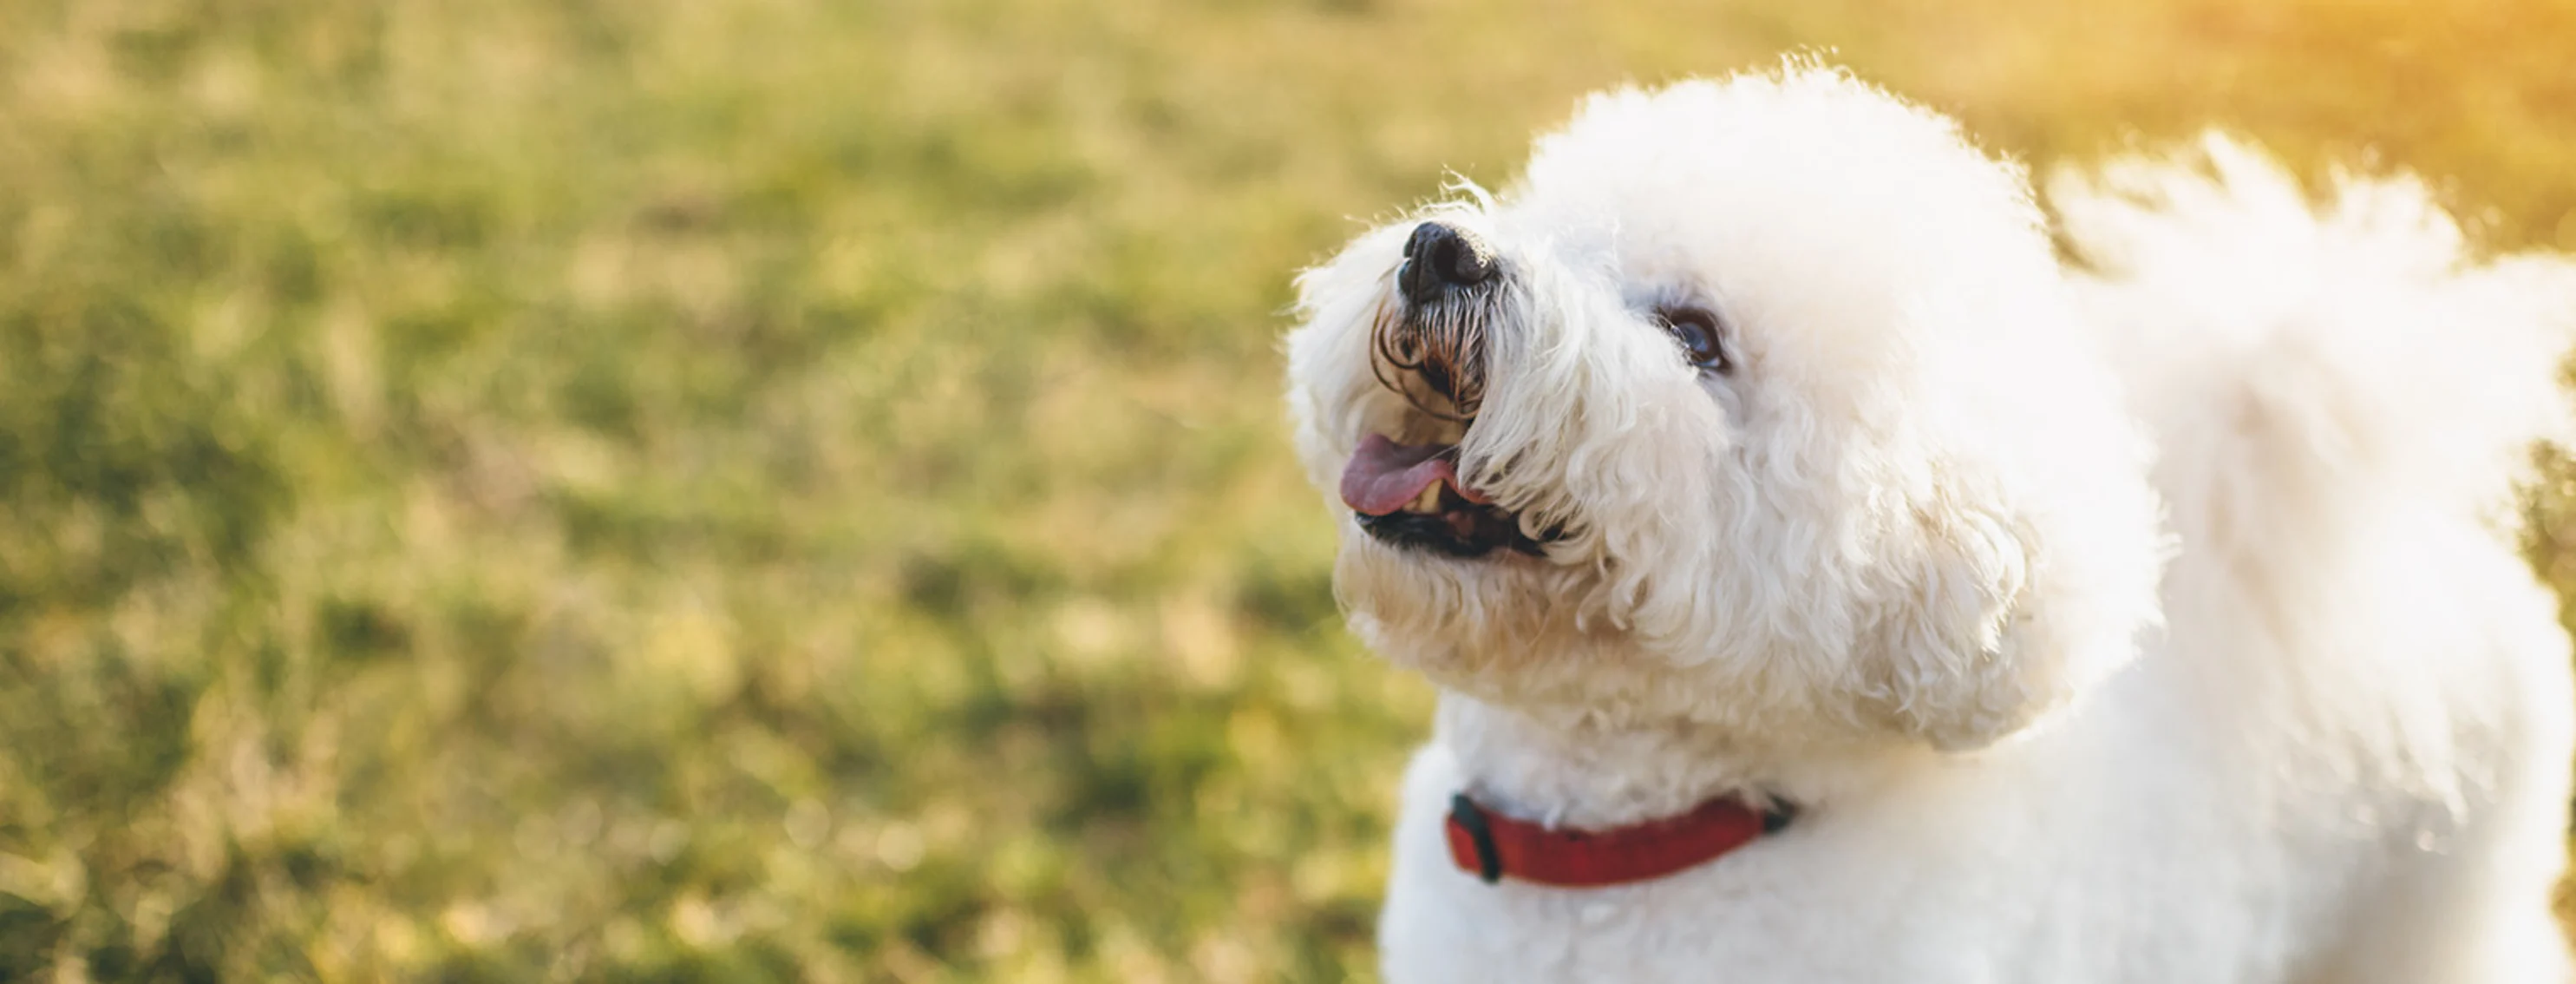 White curly dog with a red collar smiling in the grass